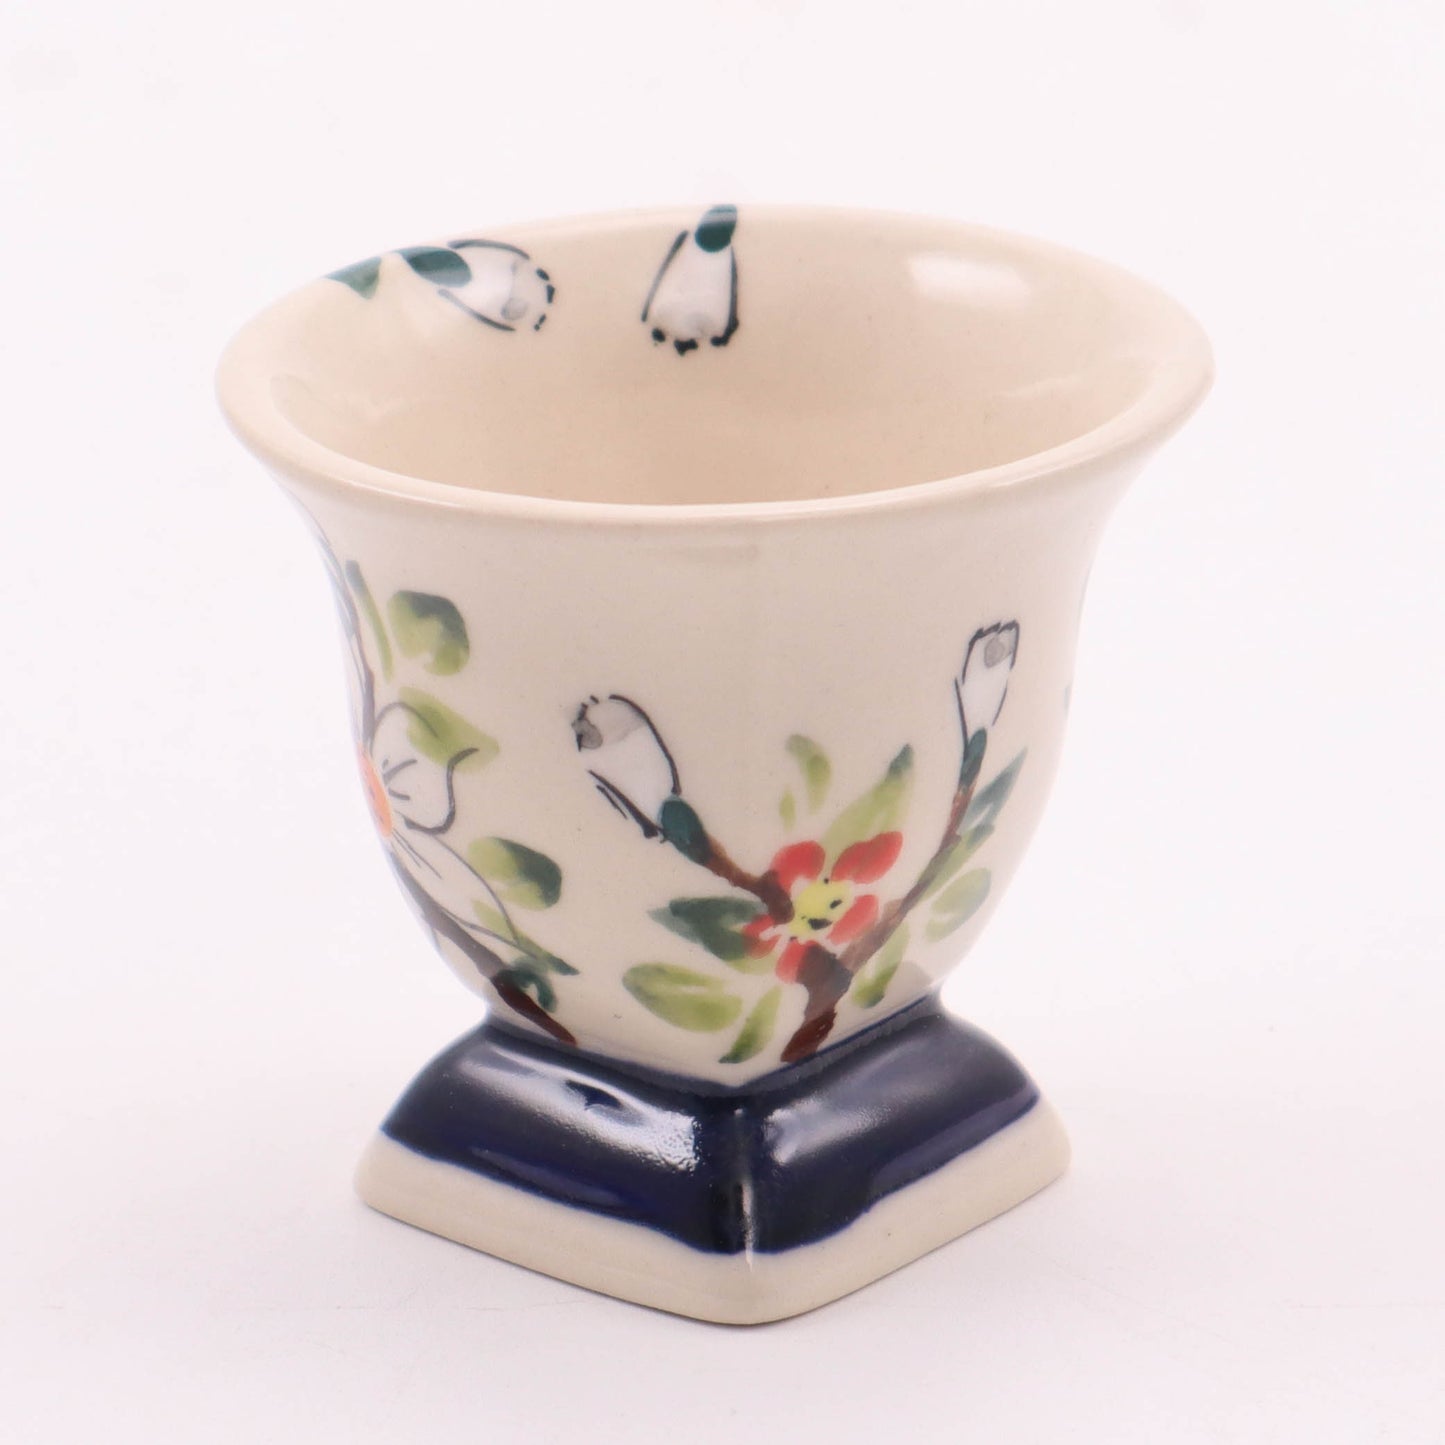 2"x2" Egg Cup. Pattern: Apple Blossom Red